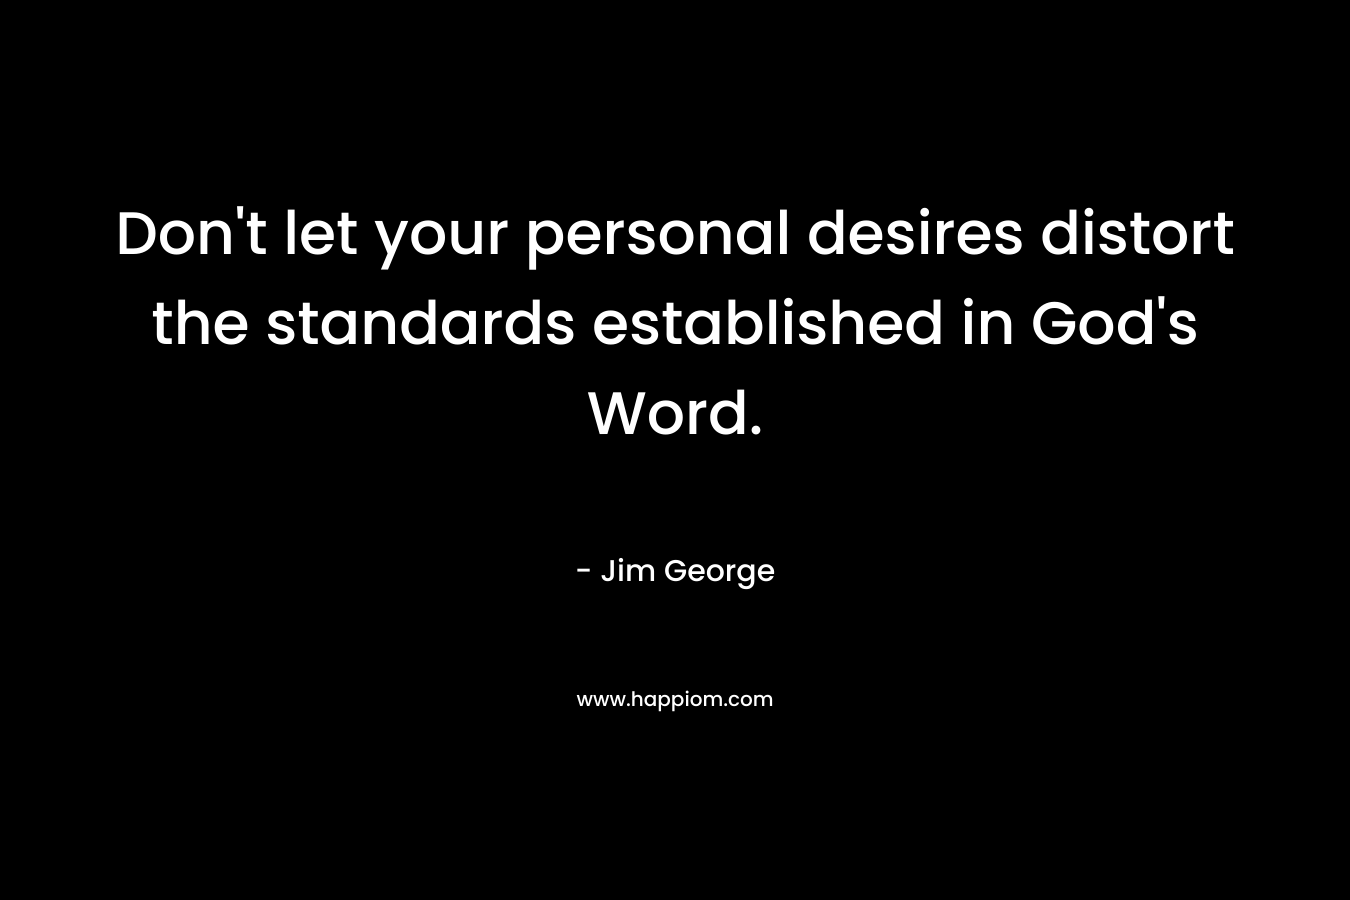 Don't let your personal desires distort the standards established in God's Word.